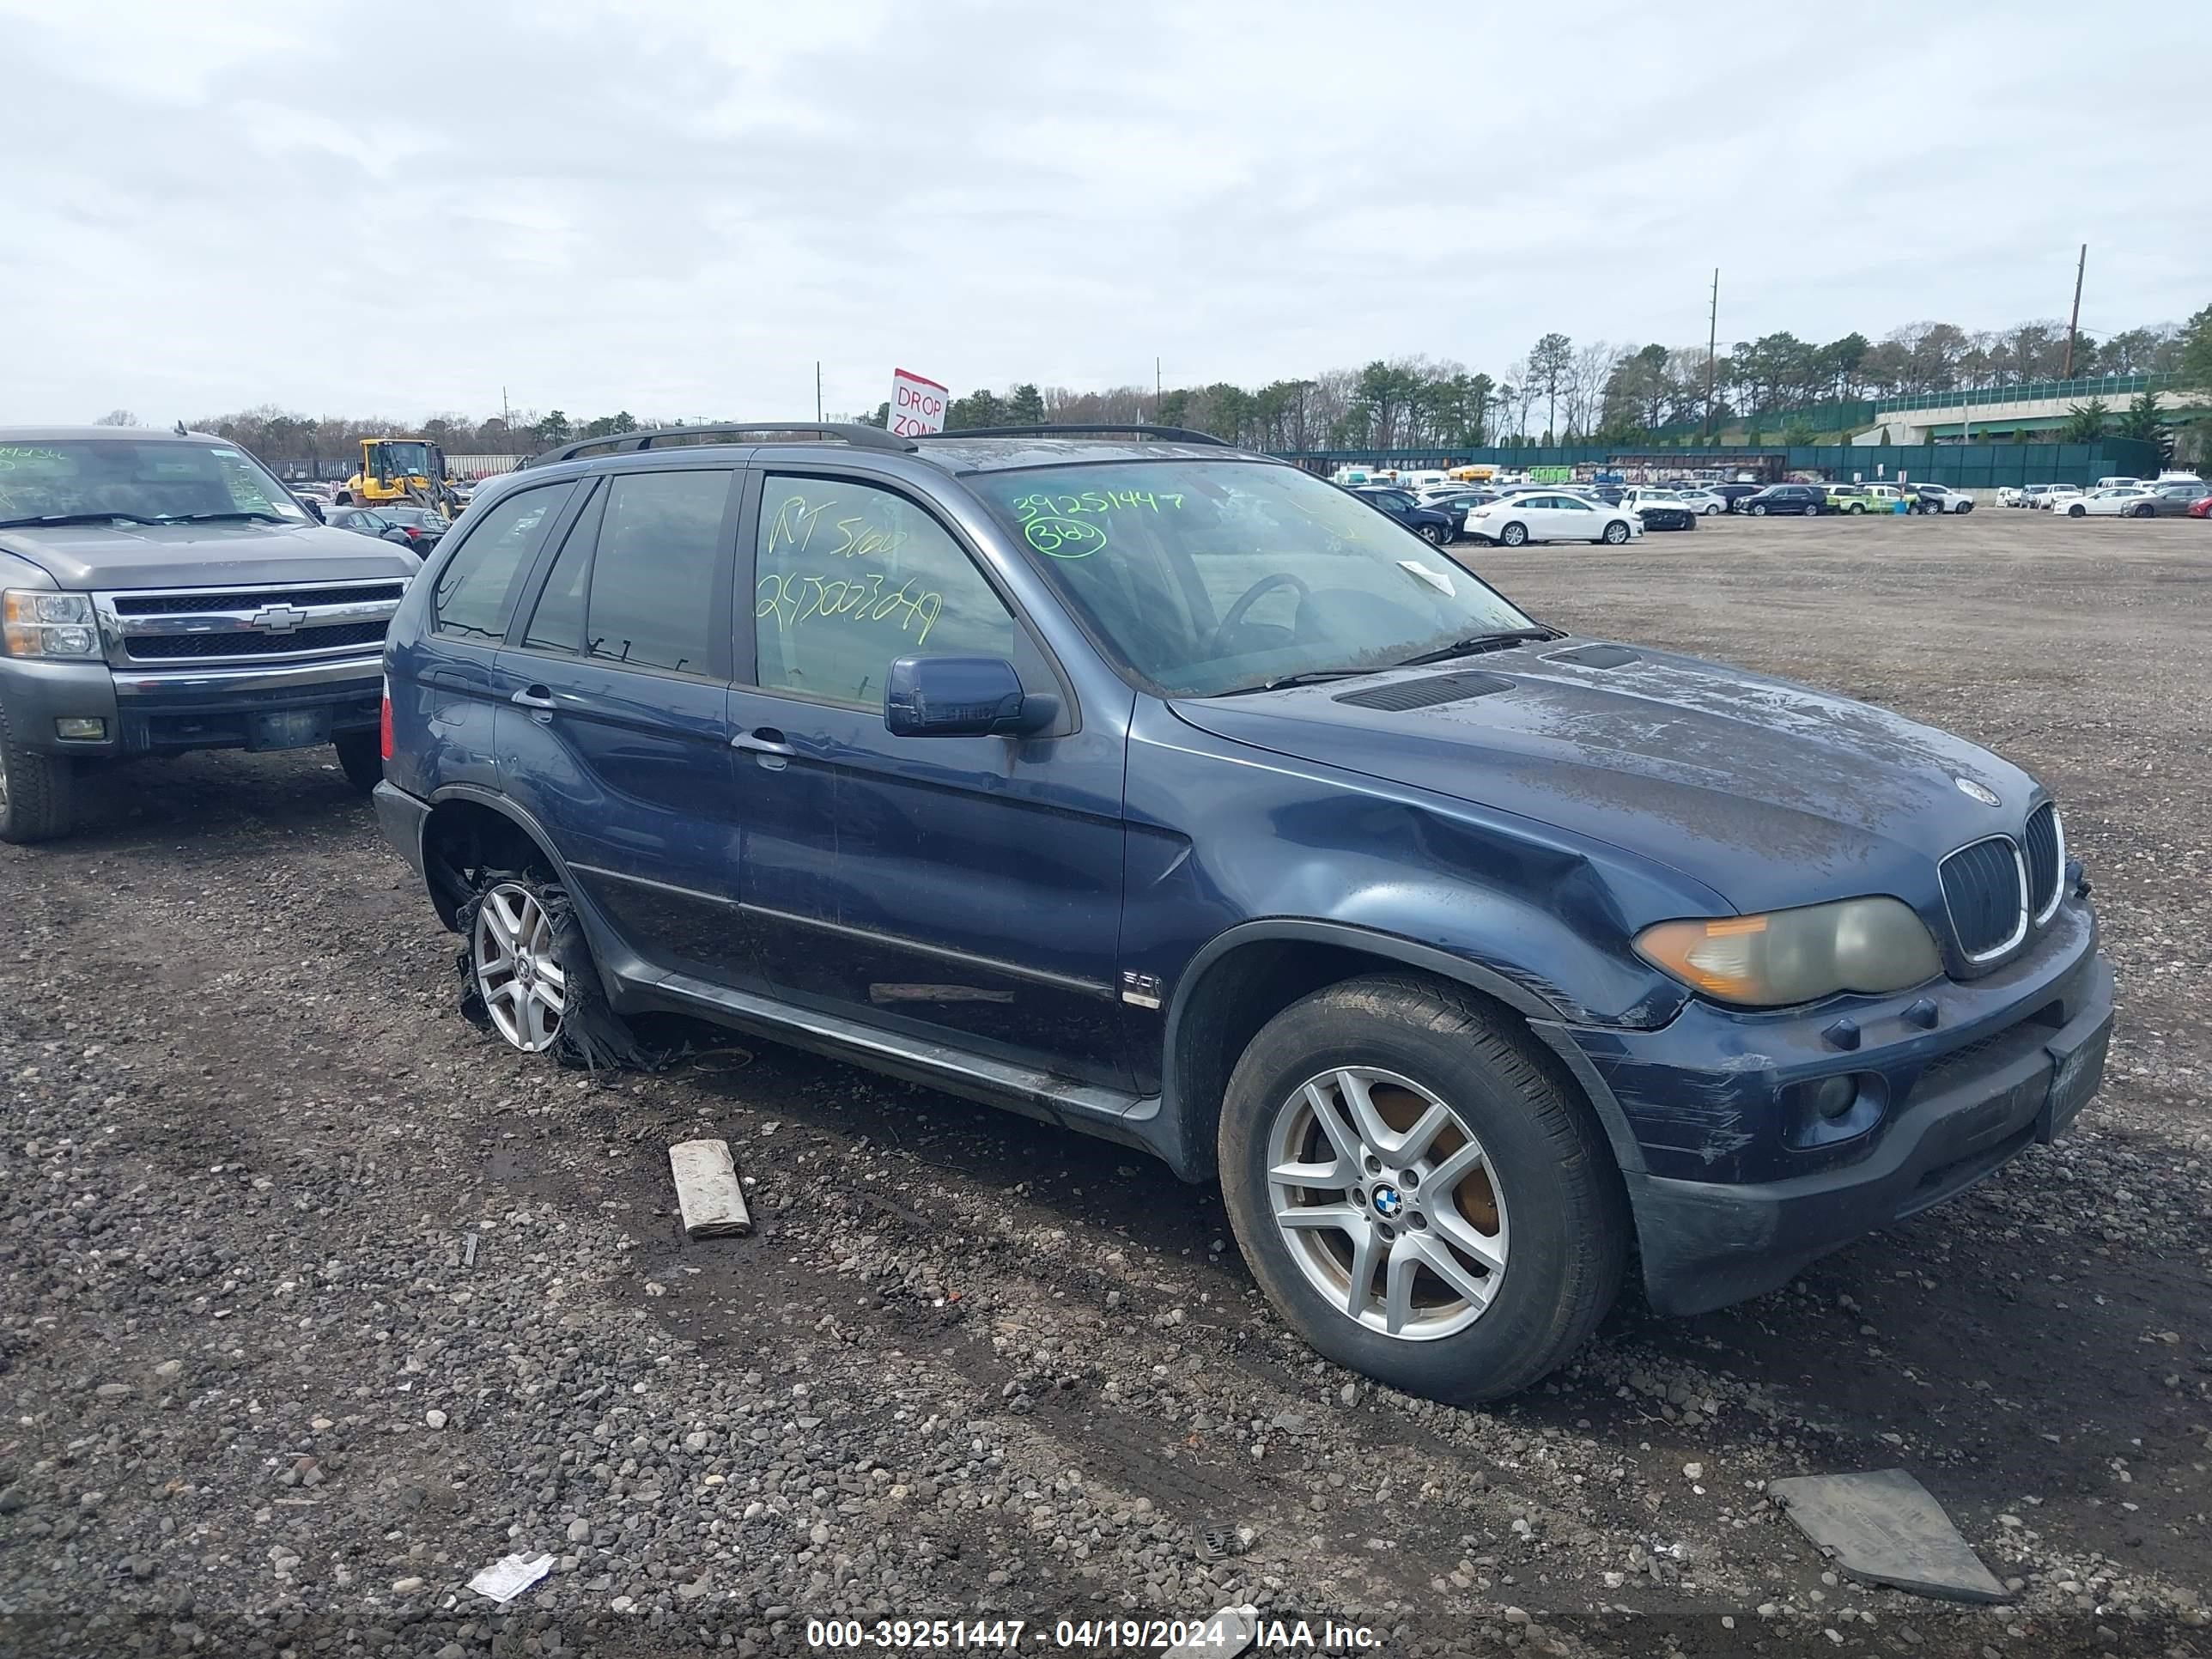 vin: 5UXFA13506LY32416 5UXFA13506LY32416 2006 bmw x5 3000 for Sale in 11763, 21 Peconic Ave, Medford, New York, USA